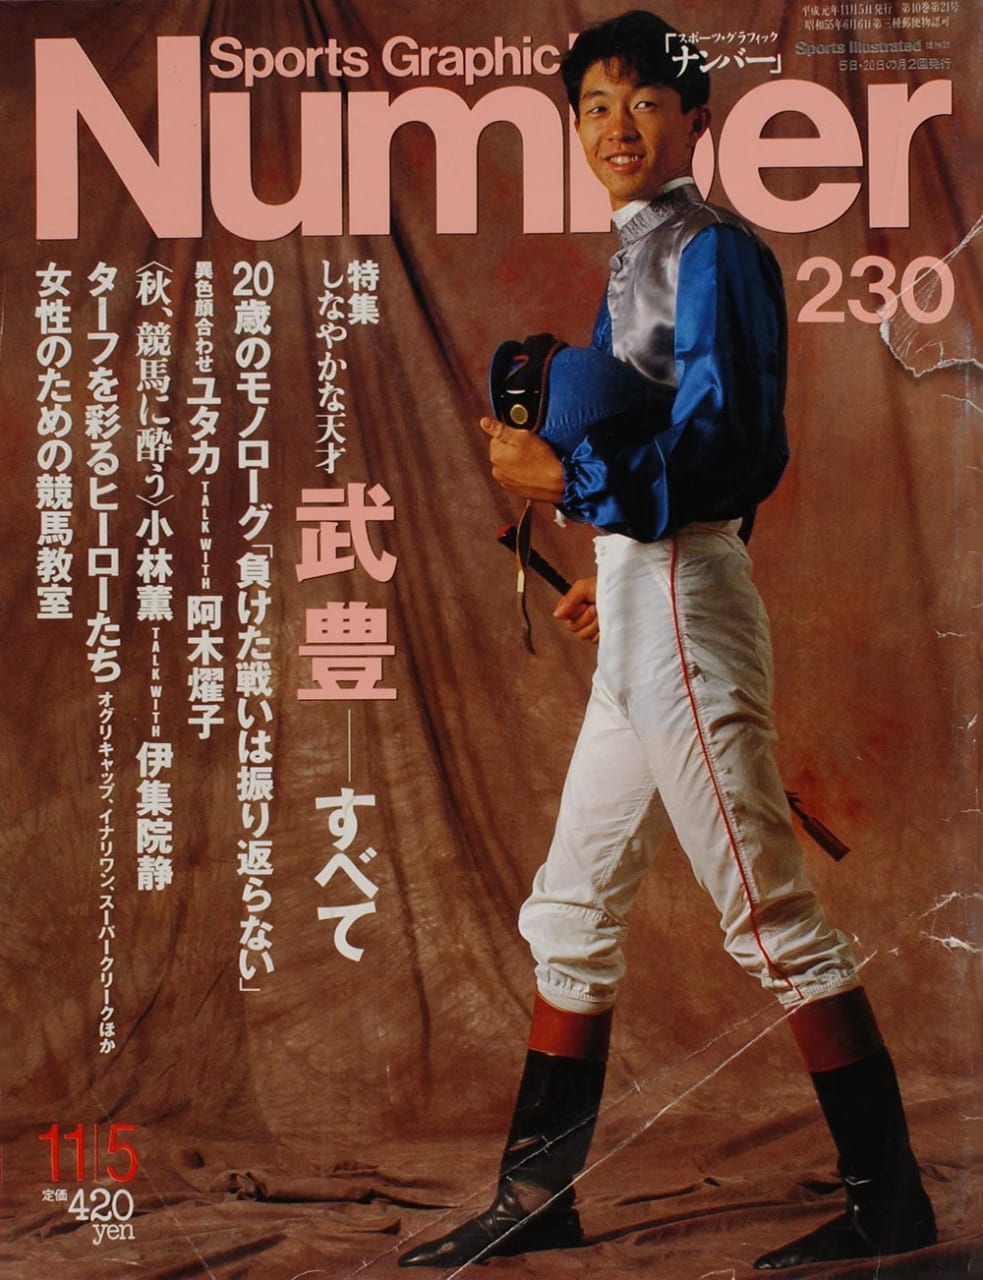 Sports Graphic Number 230号
1989年10月20日発売
表紙撮影：英隆